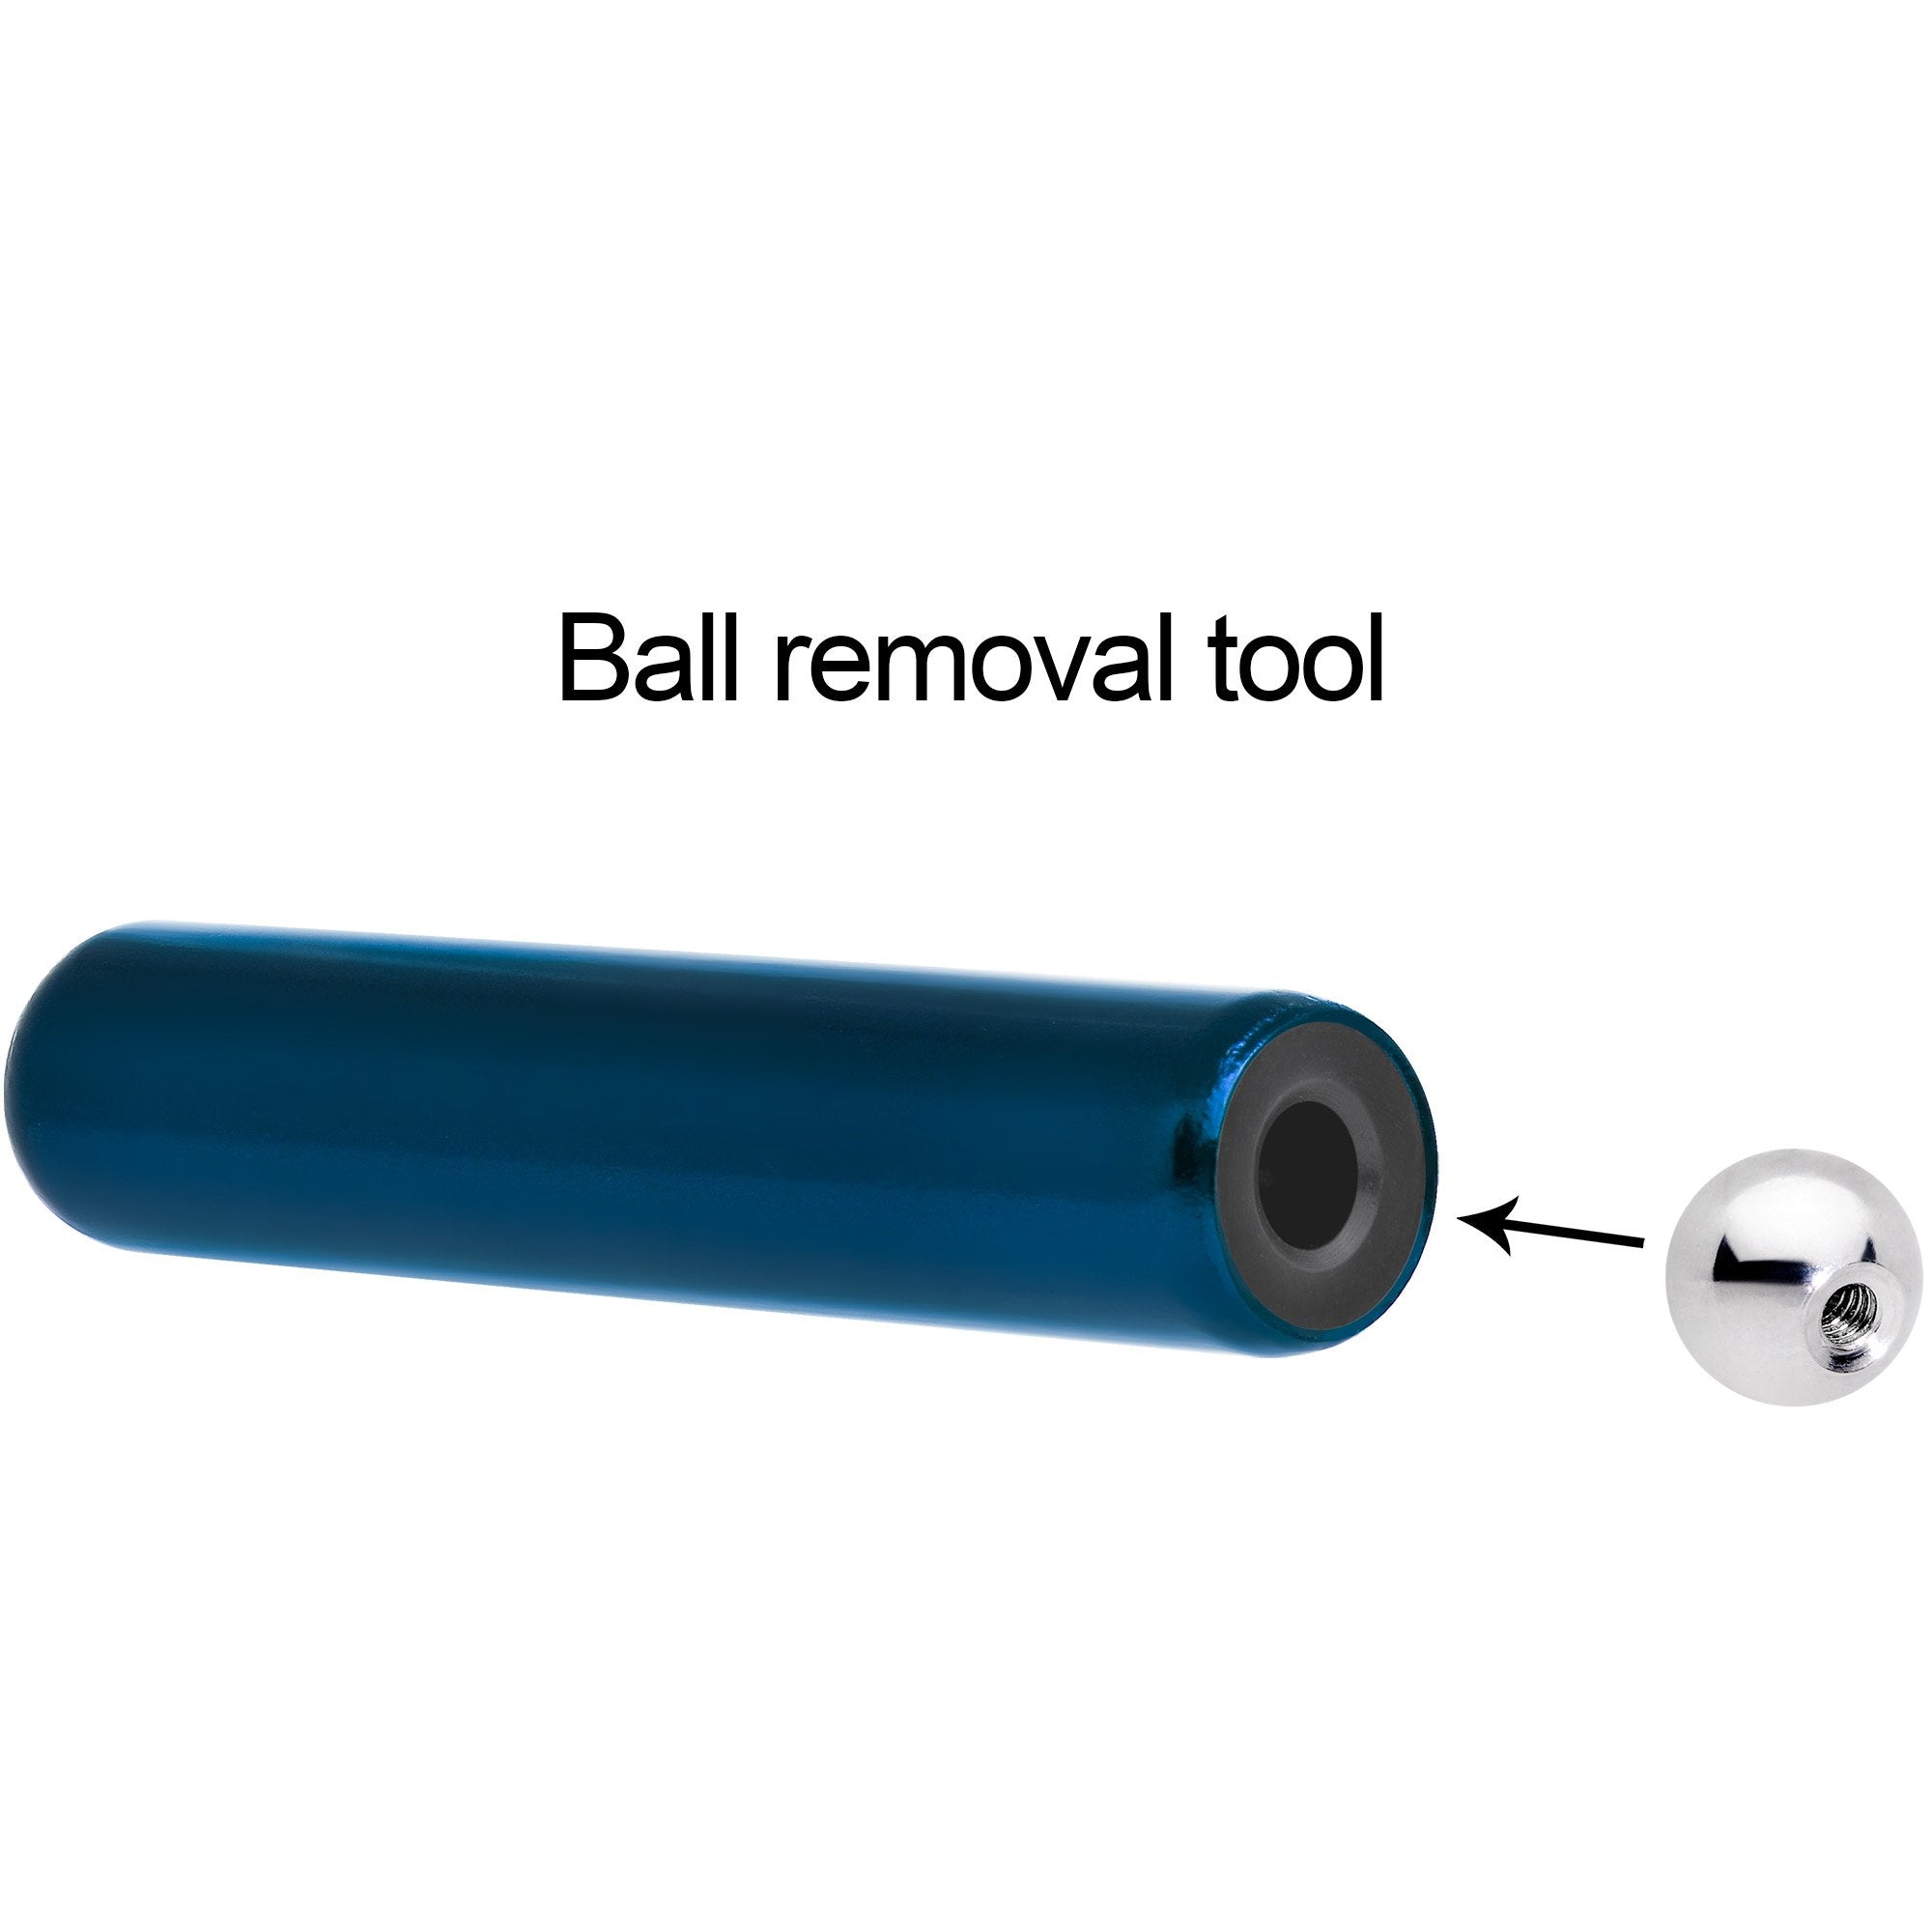 3mm-4mm Blue Aluminum Body Piercing Ball Removal Tool